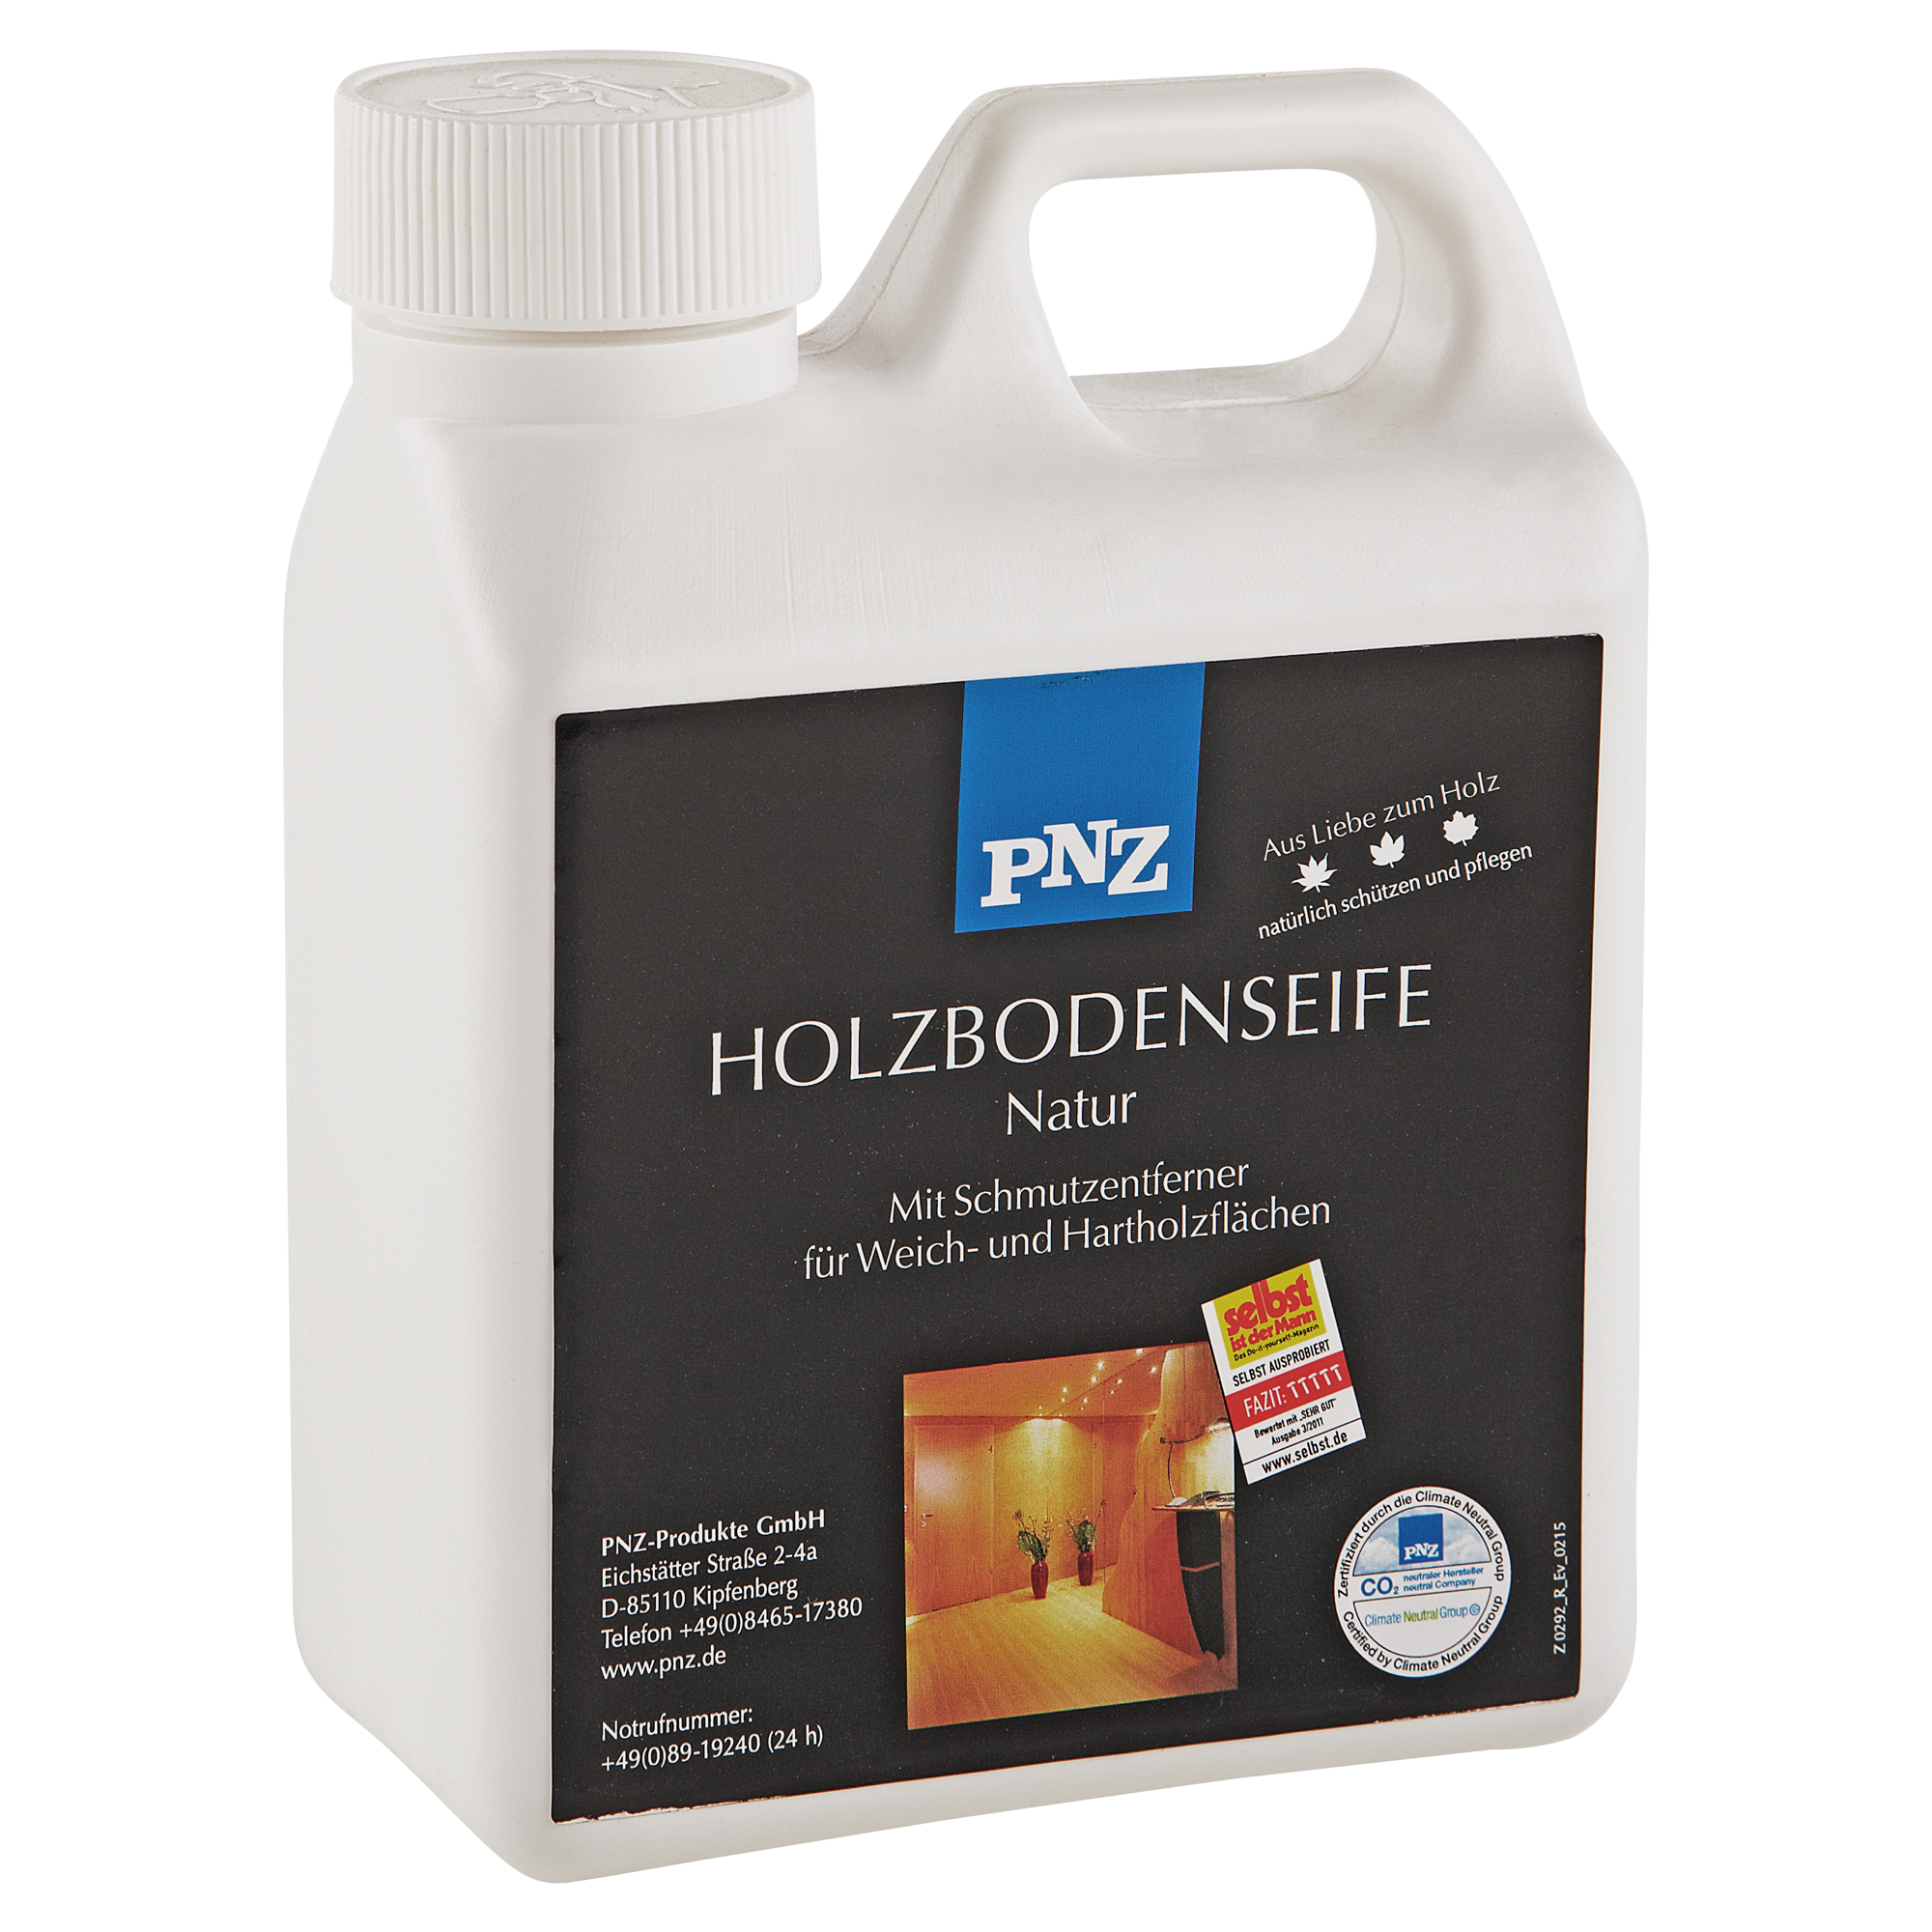 Holzbodenseife 1 l + product picture